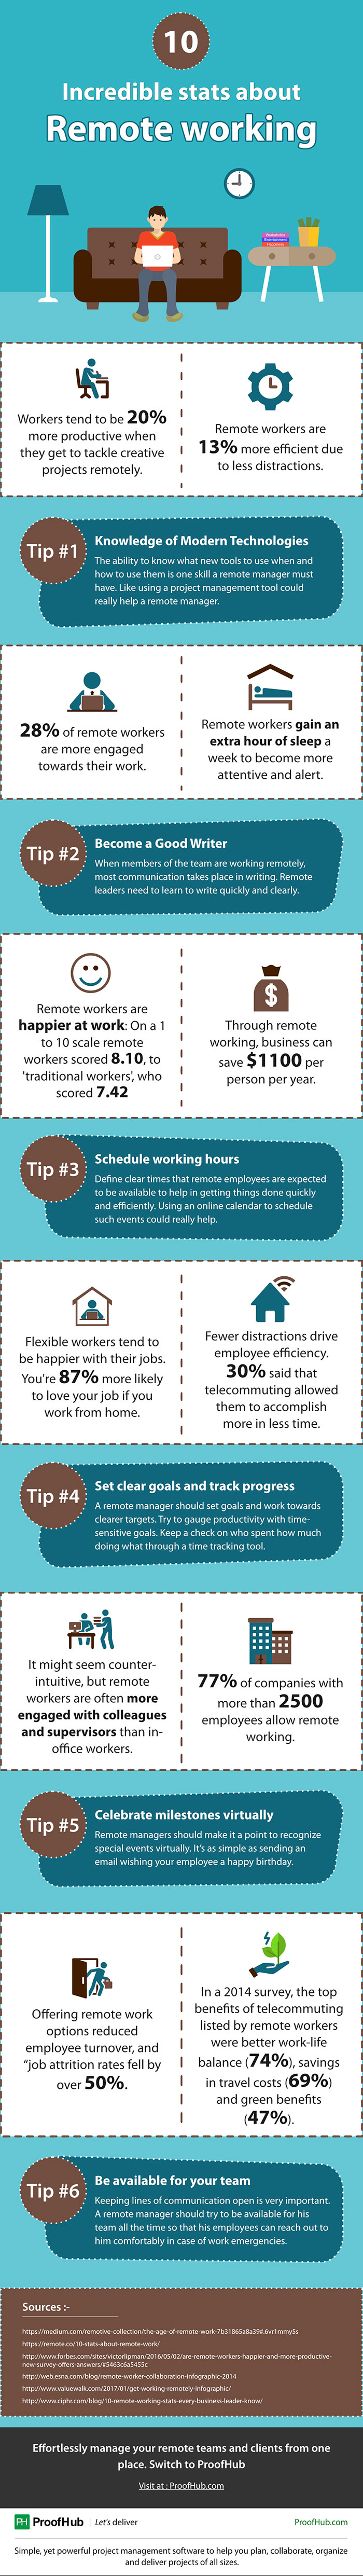 Infographic - 10 stats about remote working